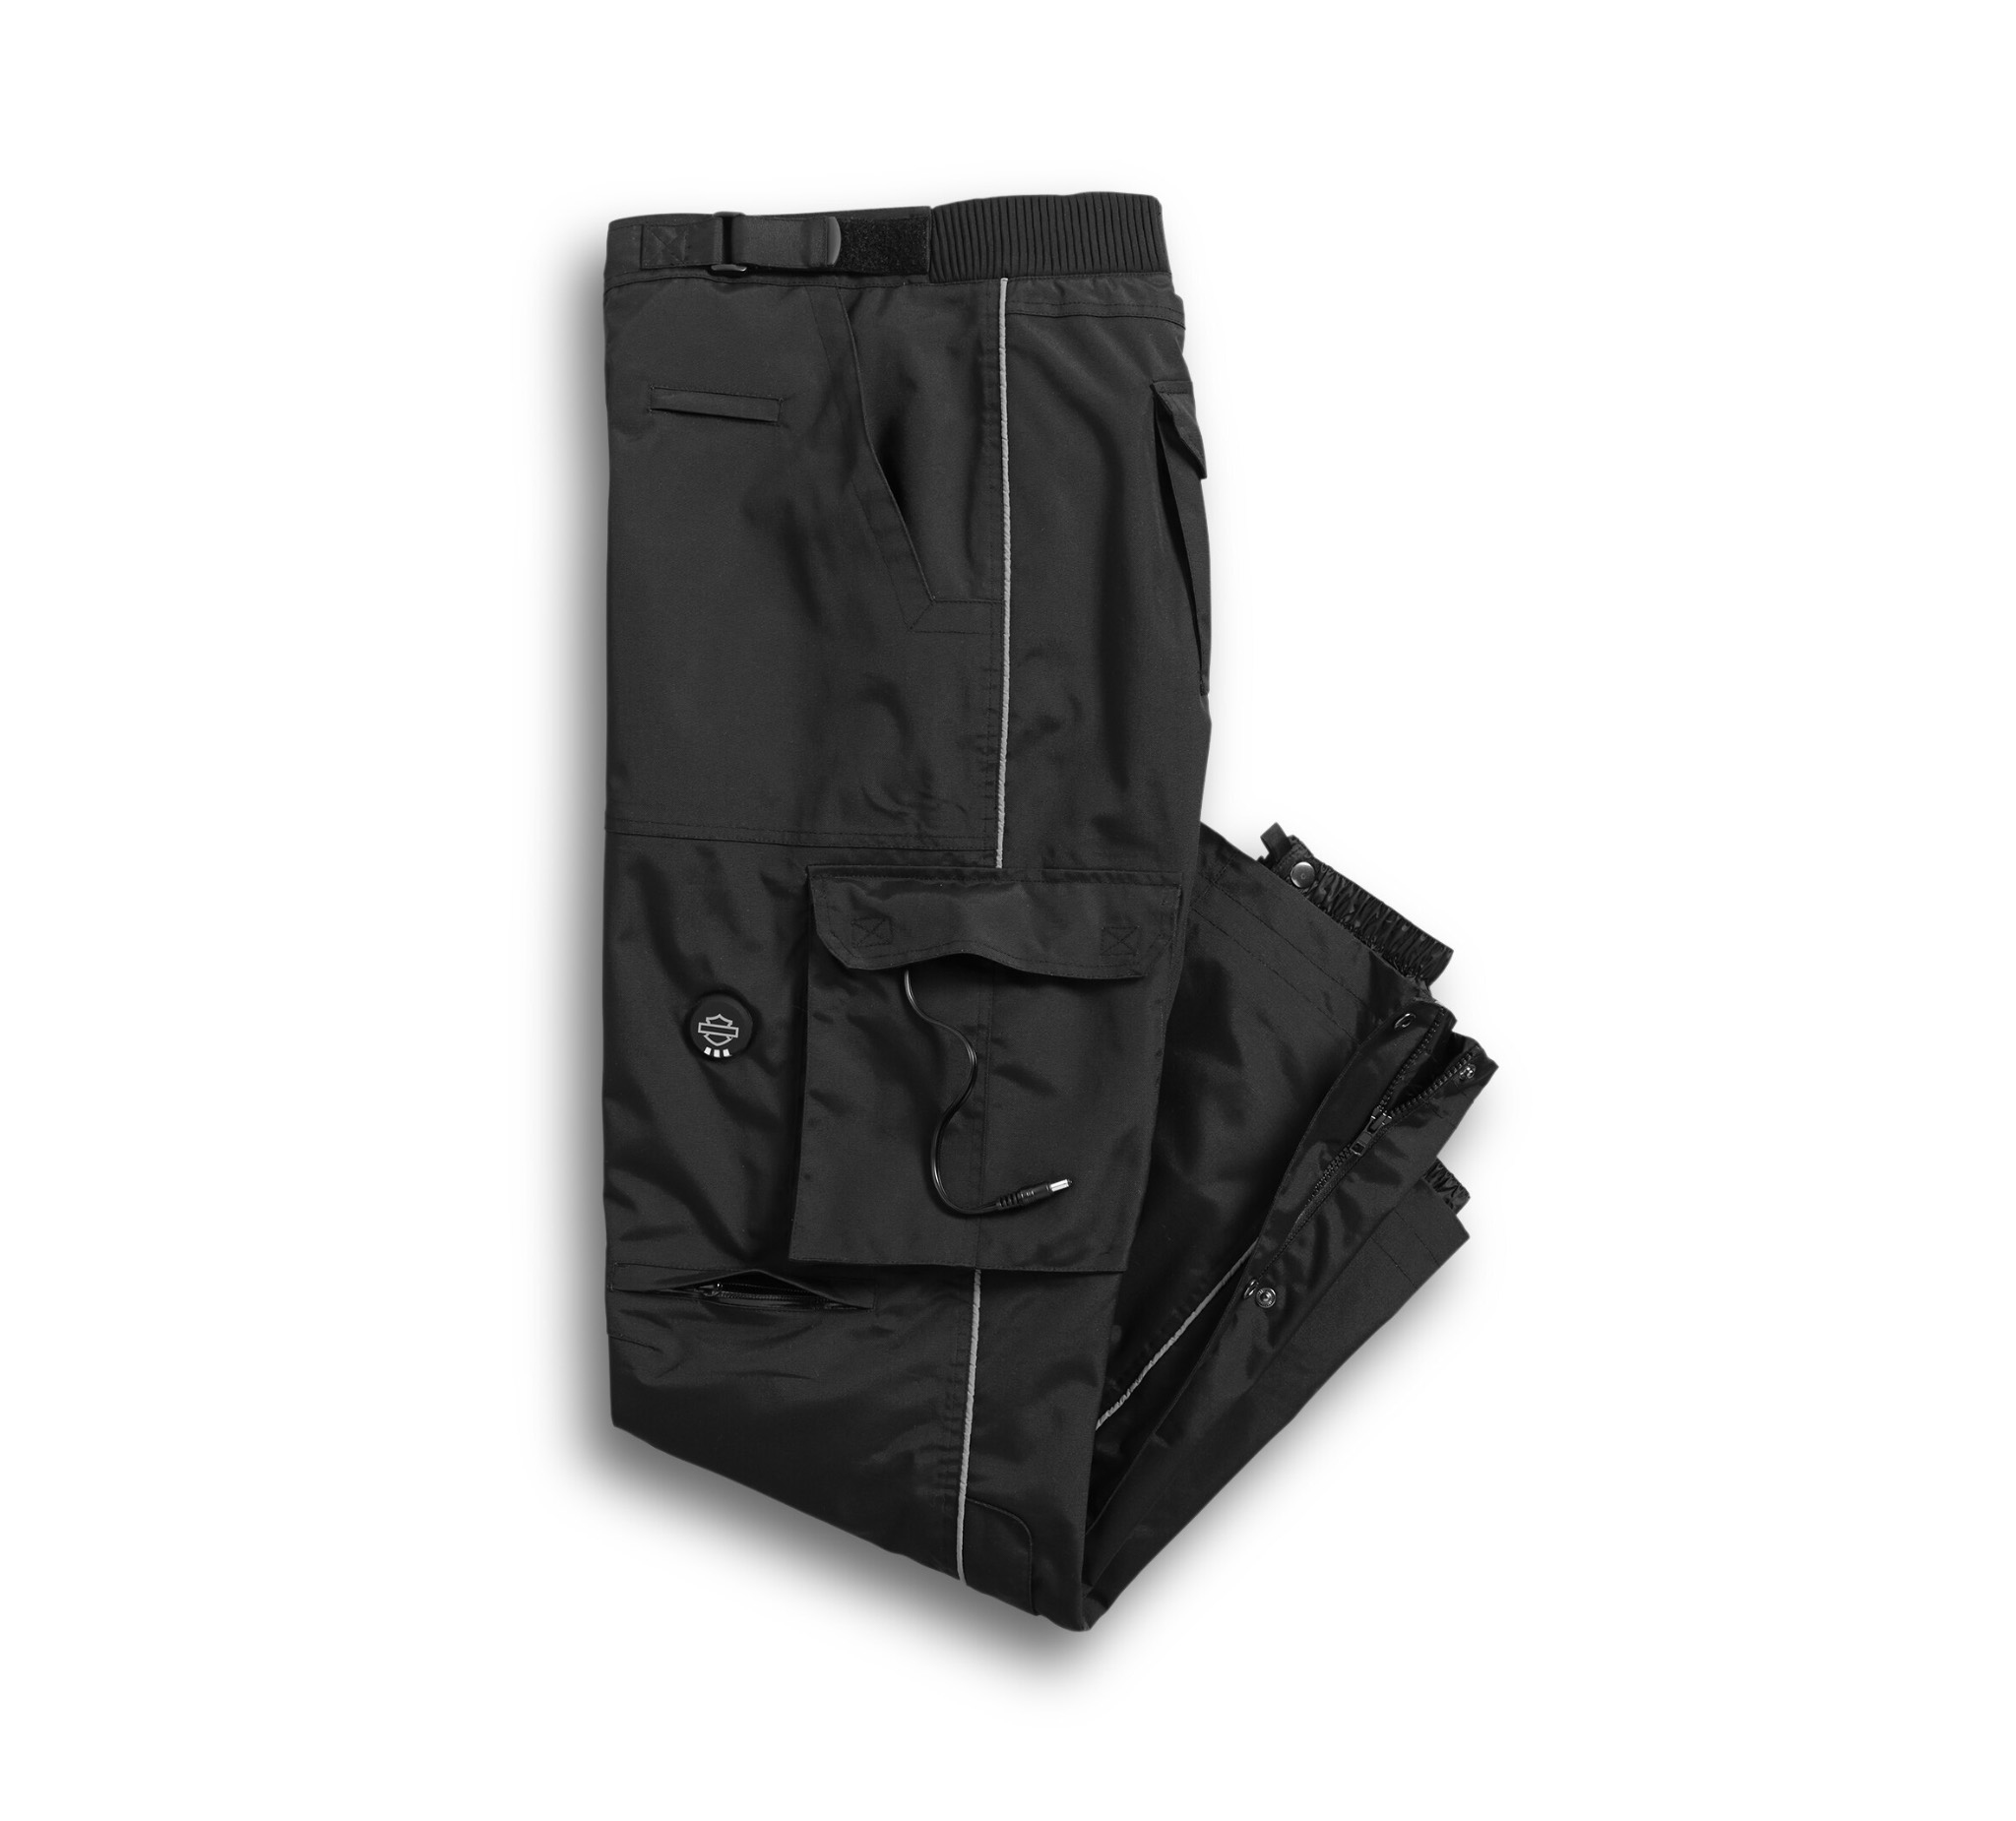 RYNOX STEALTH EVO PANTS Grey  With Rain Liner  Open Road Pune  Riding  Gear